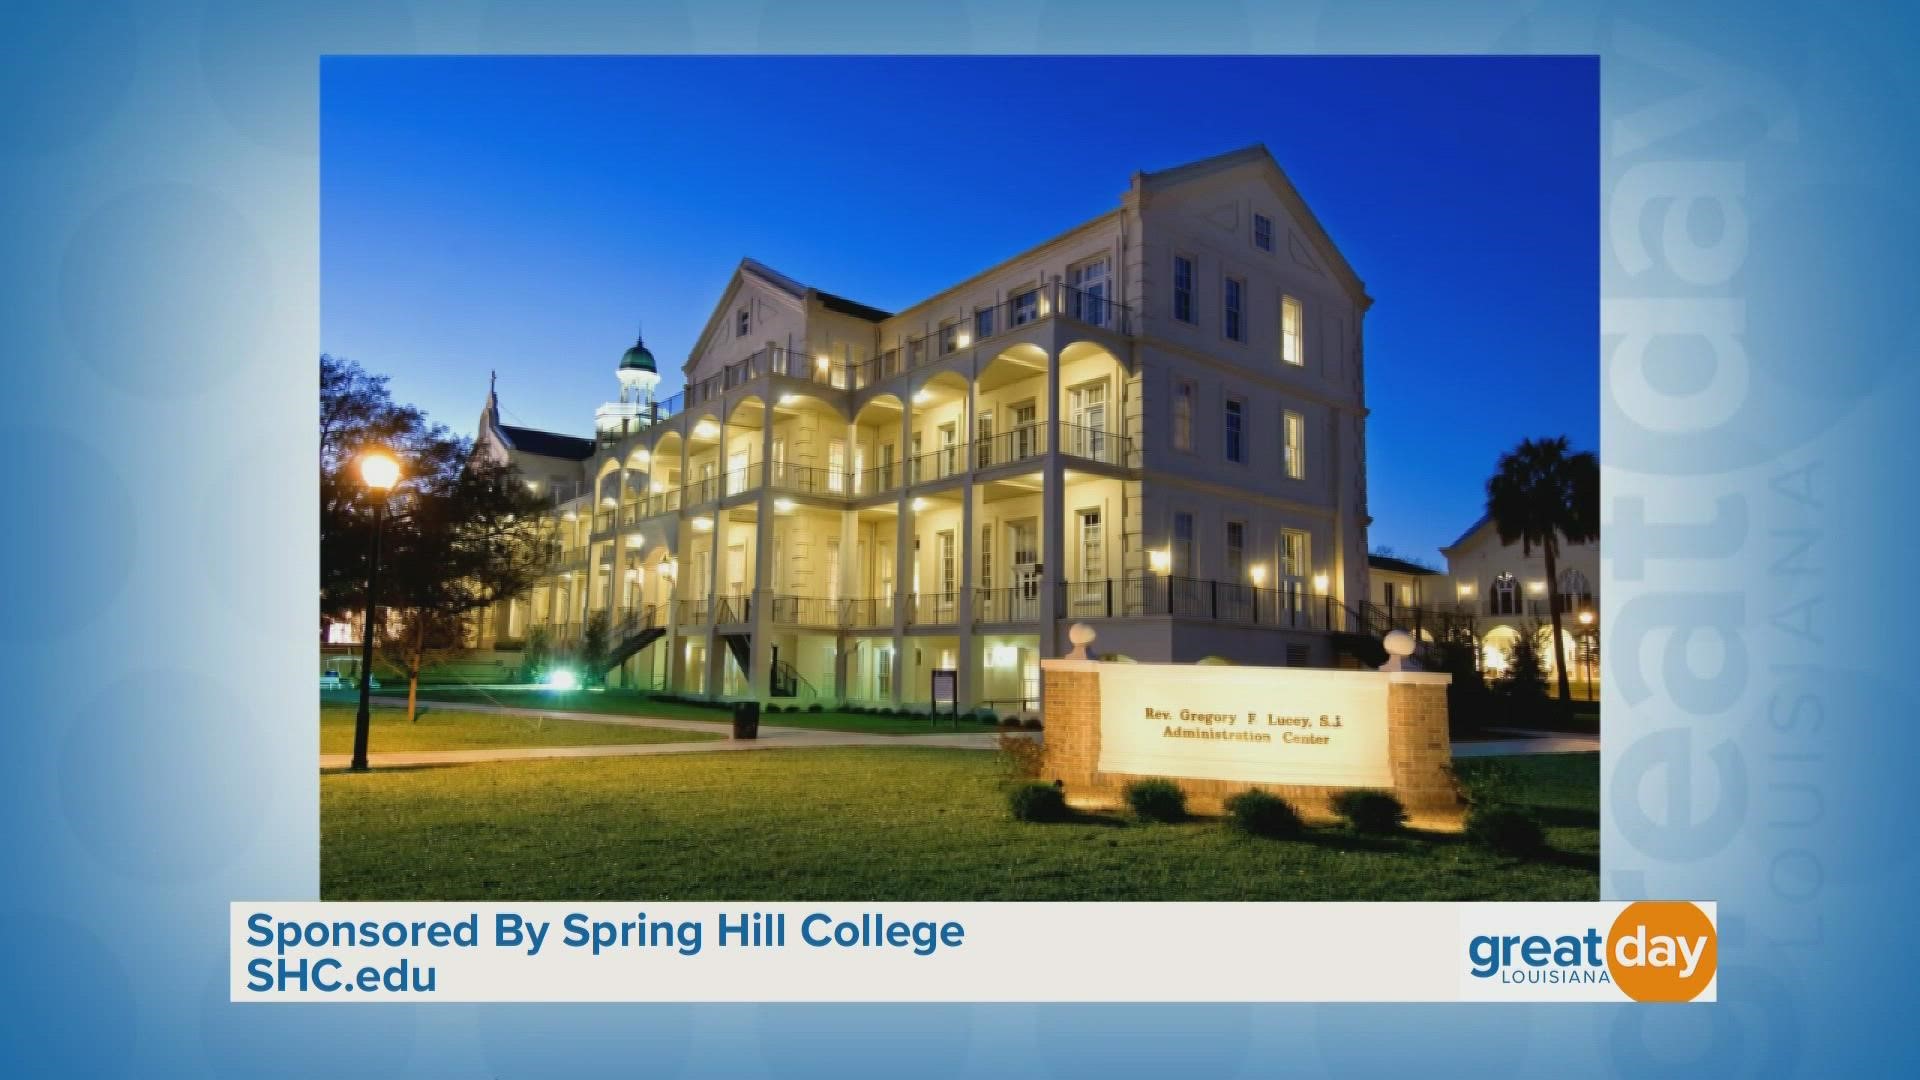 Affordable. New Degrees. New nursing scholarships. Visit Spring Hill College! It’s a chance for grant money and you could just find your college home!